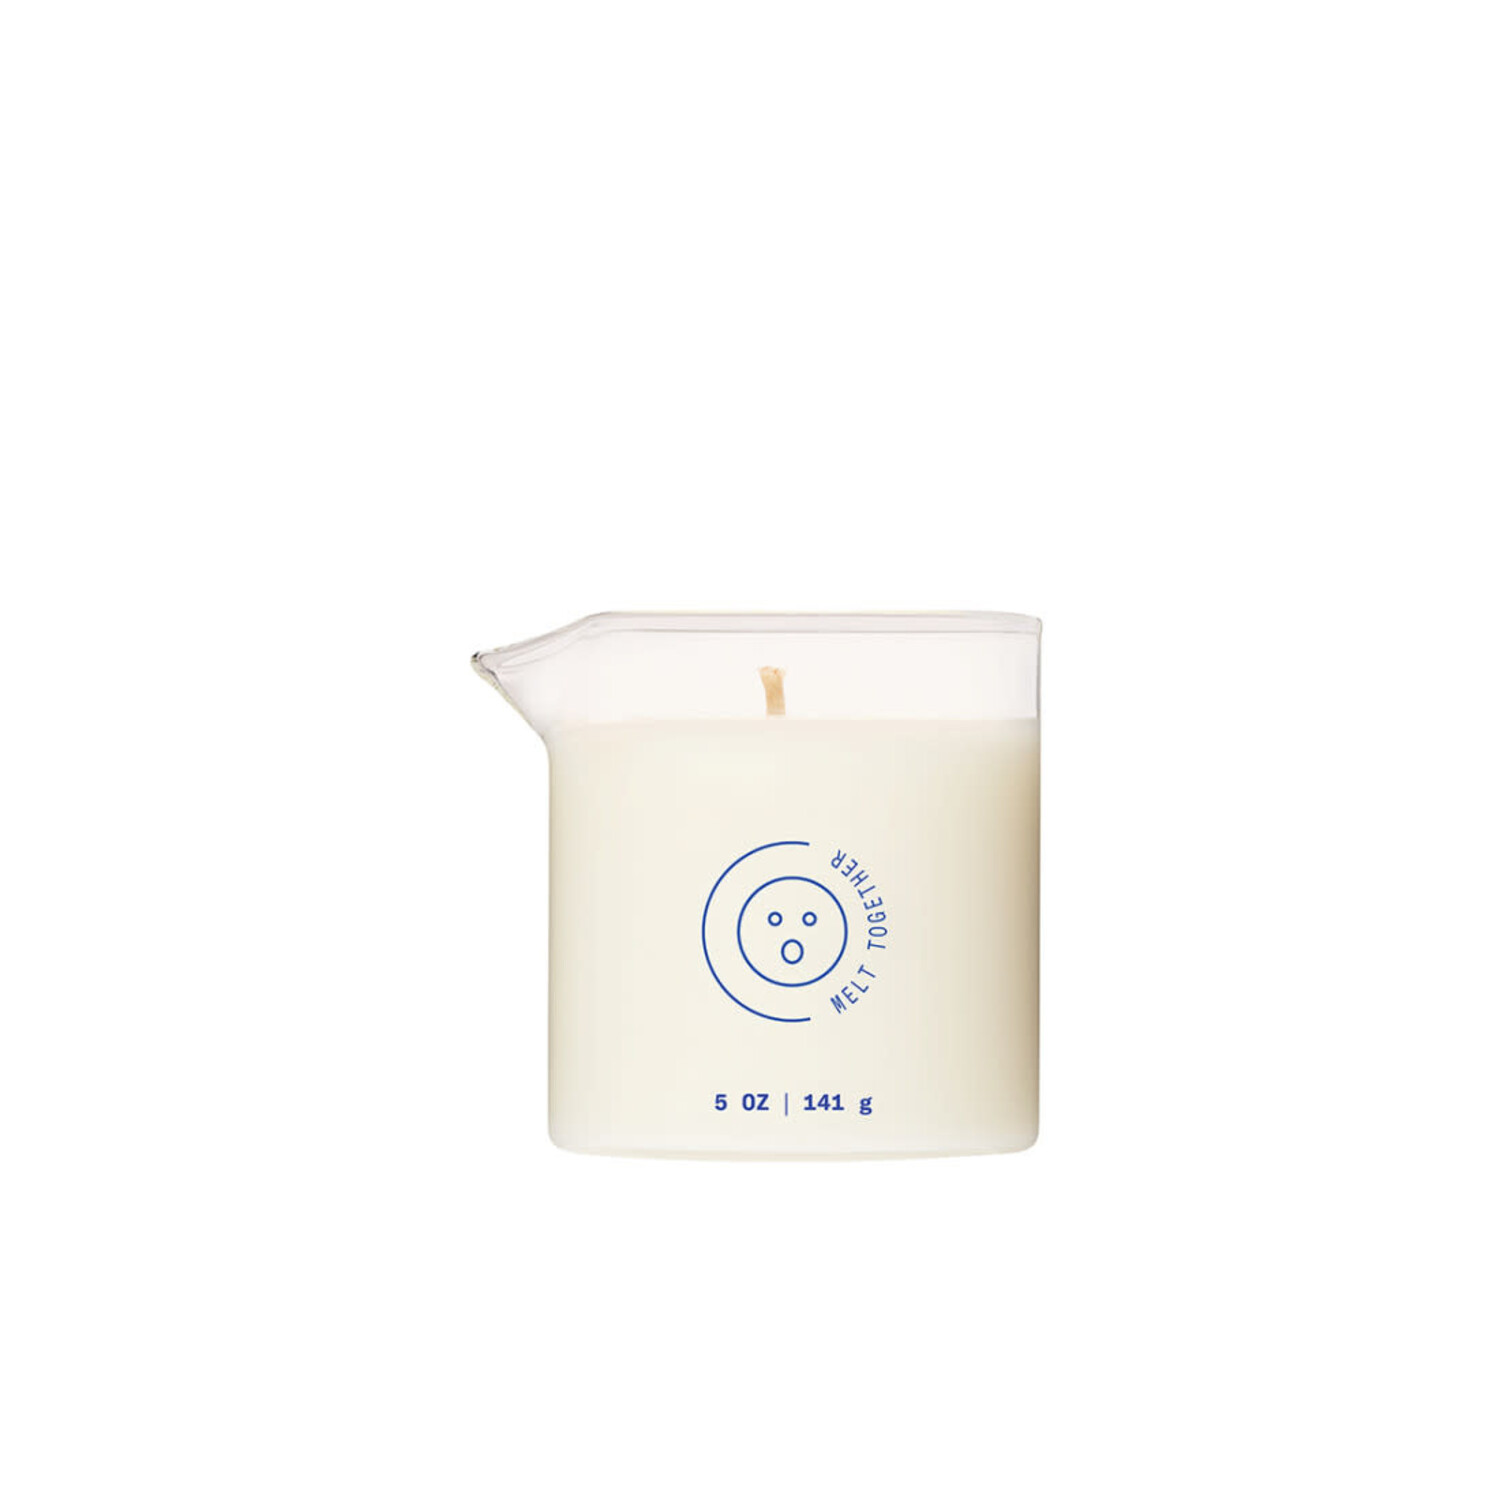 Taïga Massage Candle, a sweet moment for two